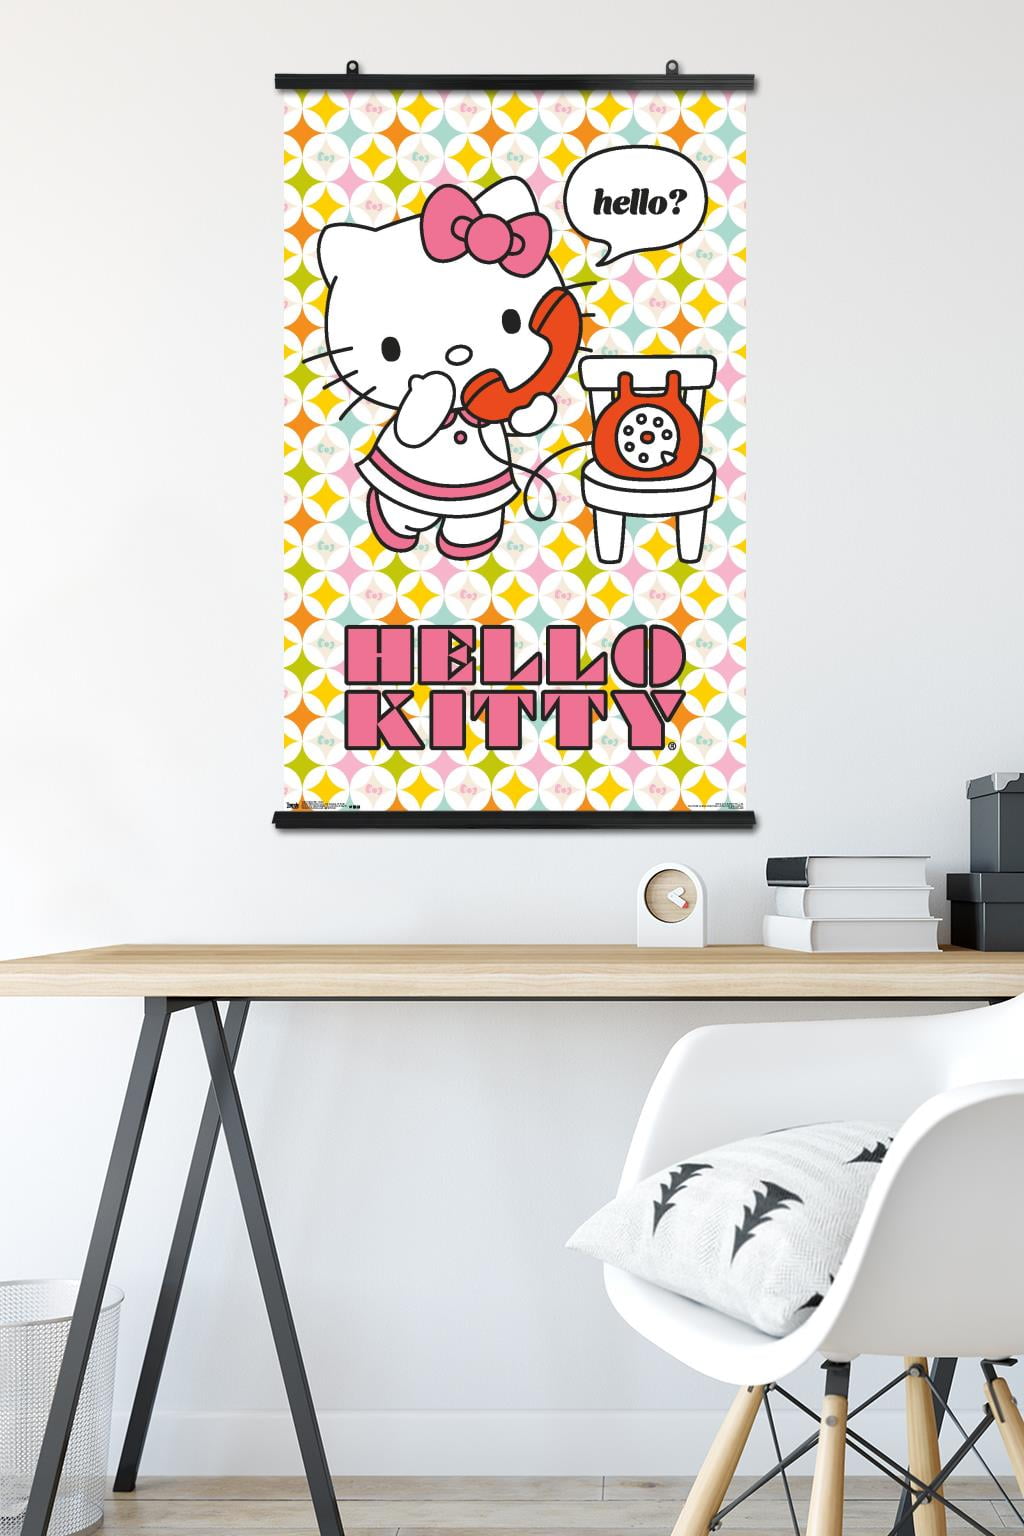  nostalgia decals Hello Kitty Decal Wall Decor 24 x 20 in The  United States : Tools & Home Improvement